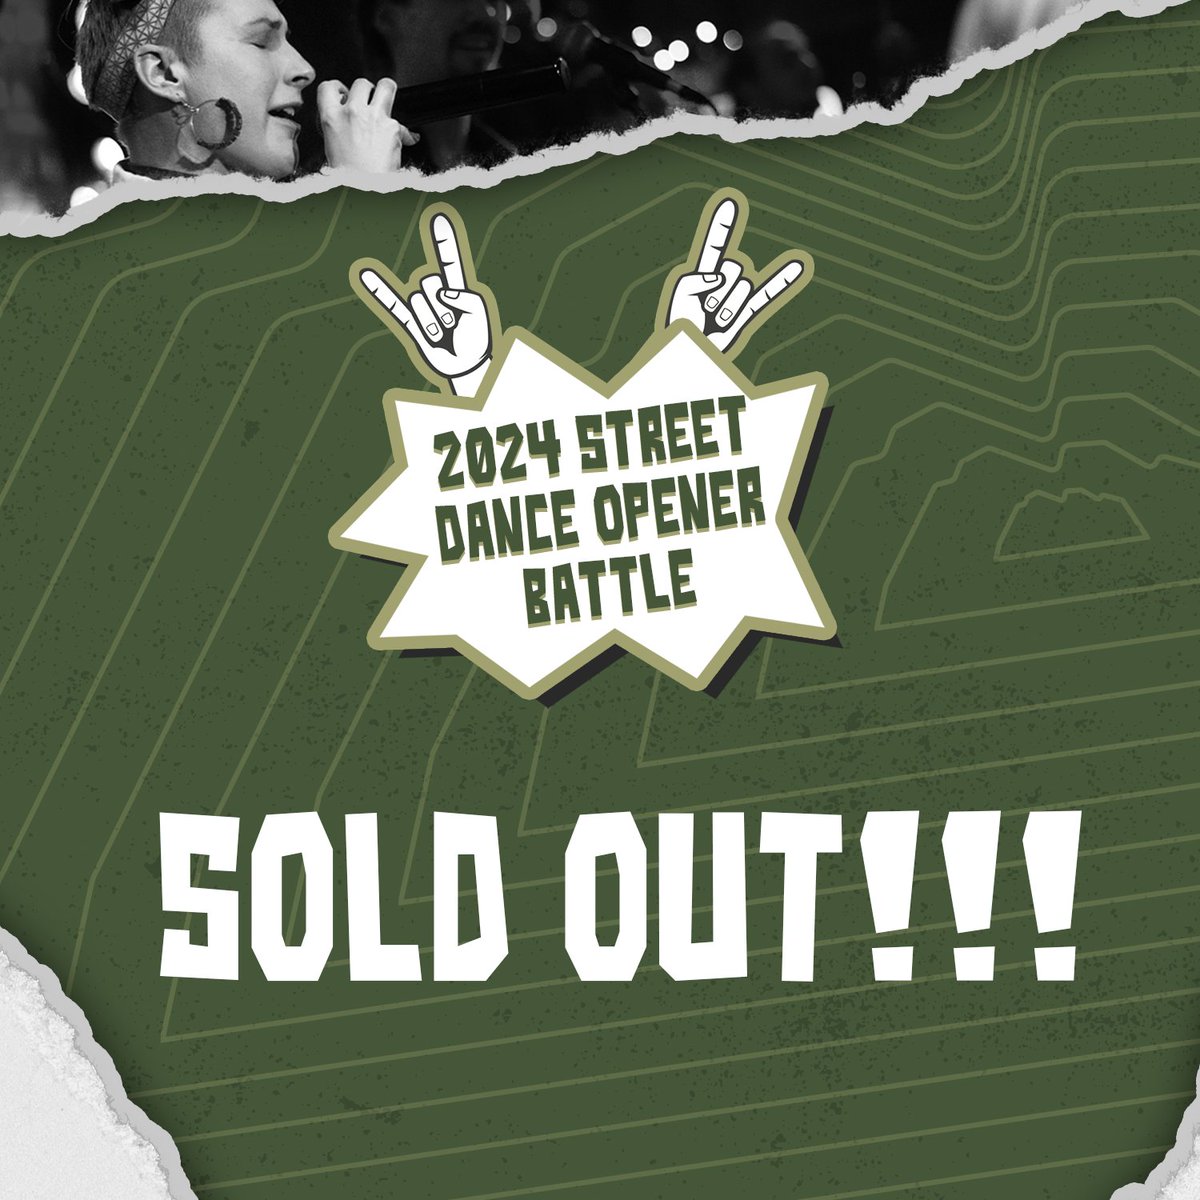 Tickets for this weekend's Street Dance Opener Battle are now SOLD OUT! See you all on Saturday night!